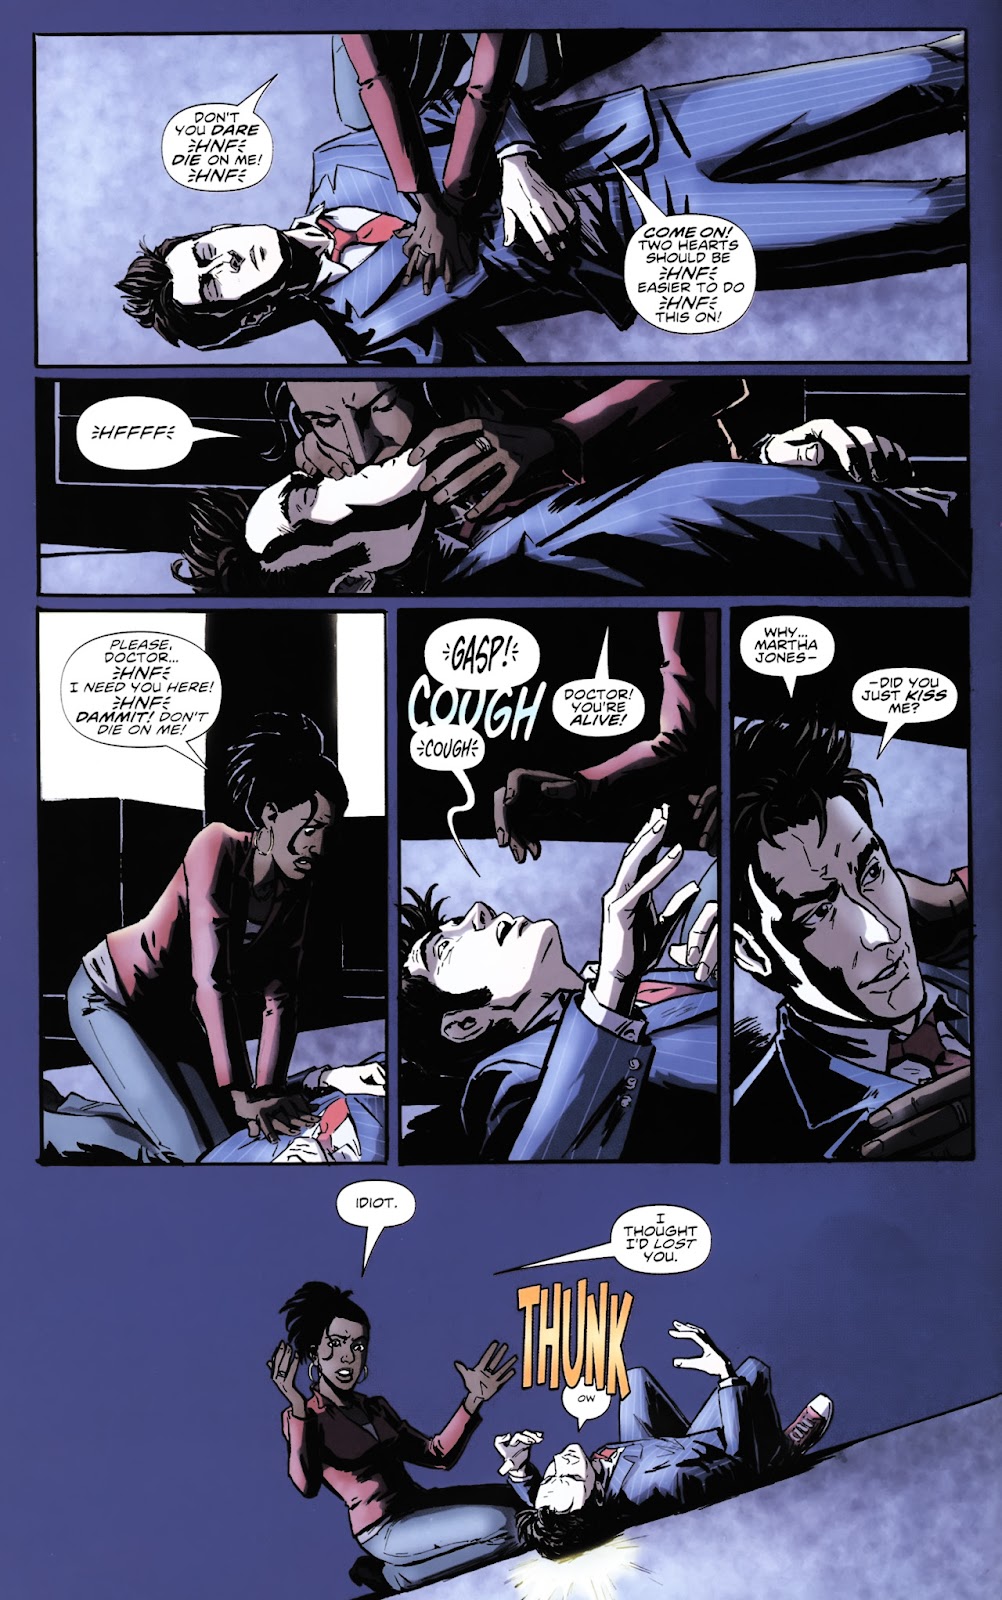 Doctor Who: The Forgotten issue 2 - Page 4